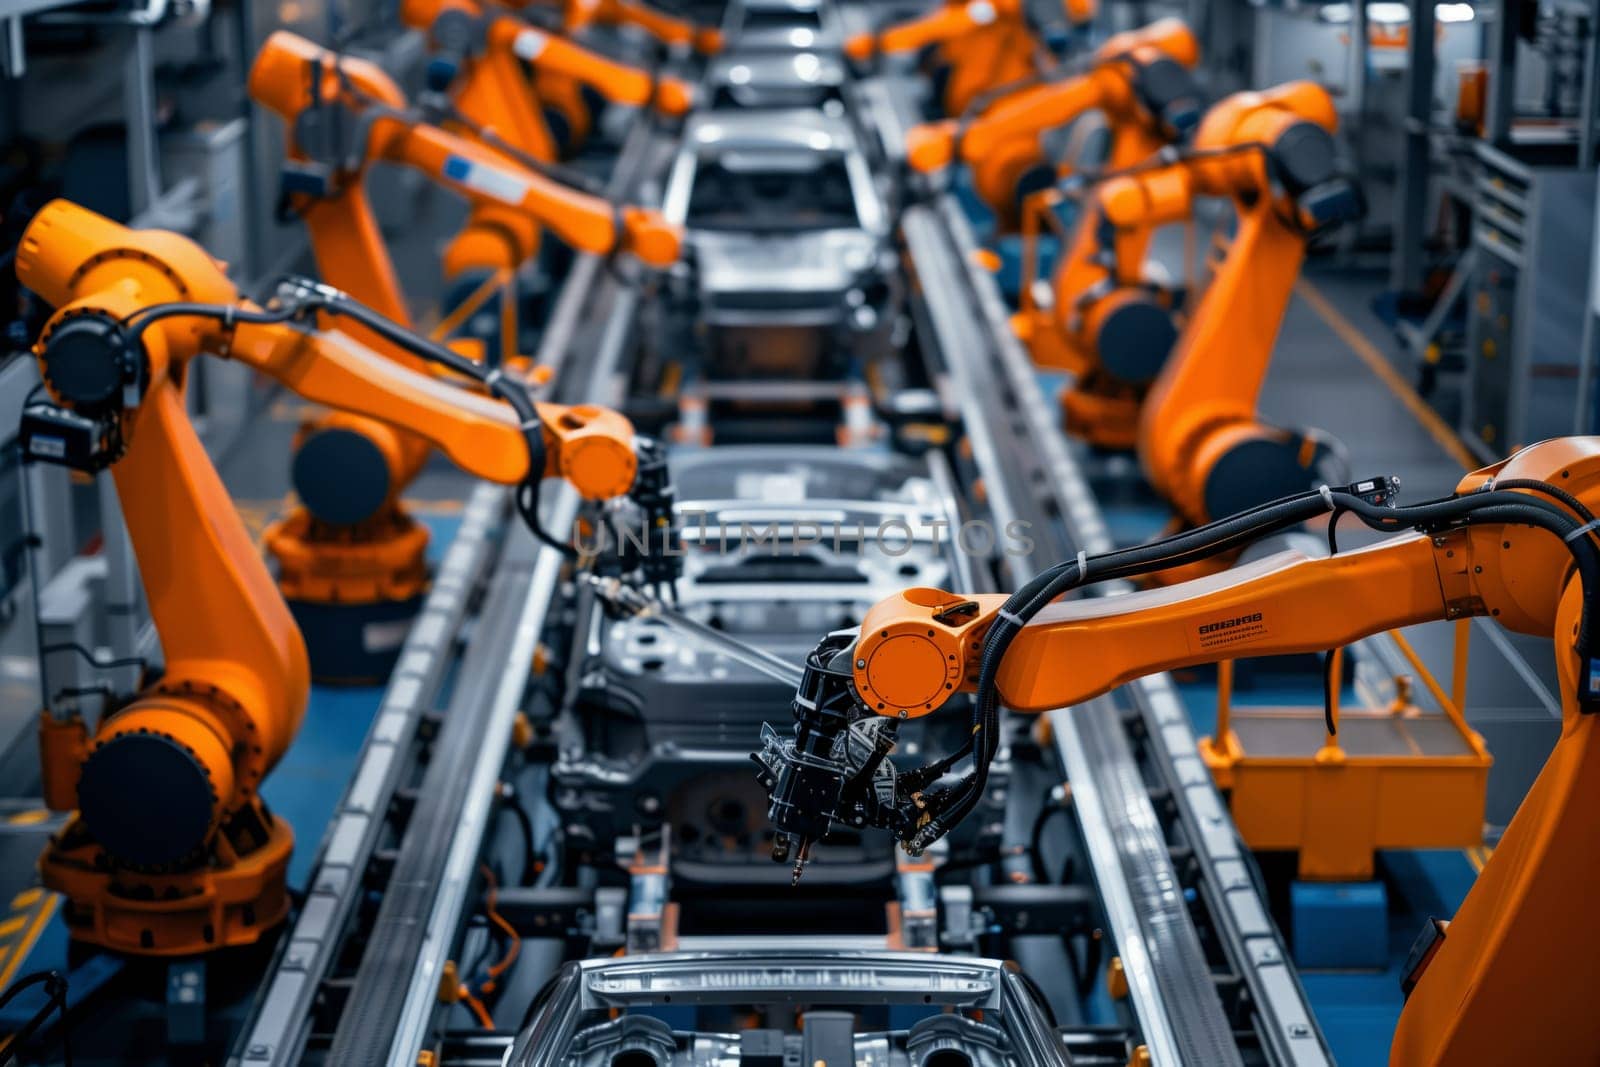 Robotic arms in an engineering factory move motor vehicles on a conveyor belt for mass production of steel casing pipes and auto parts